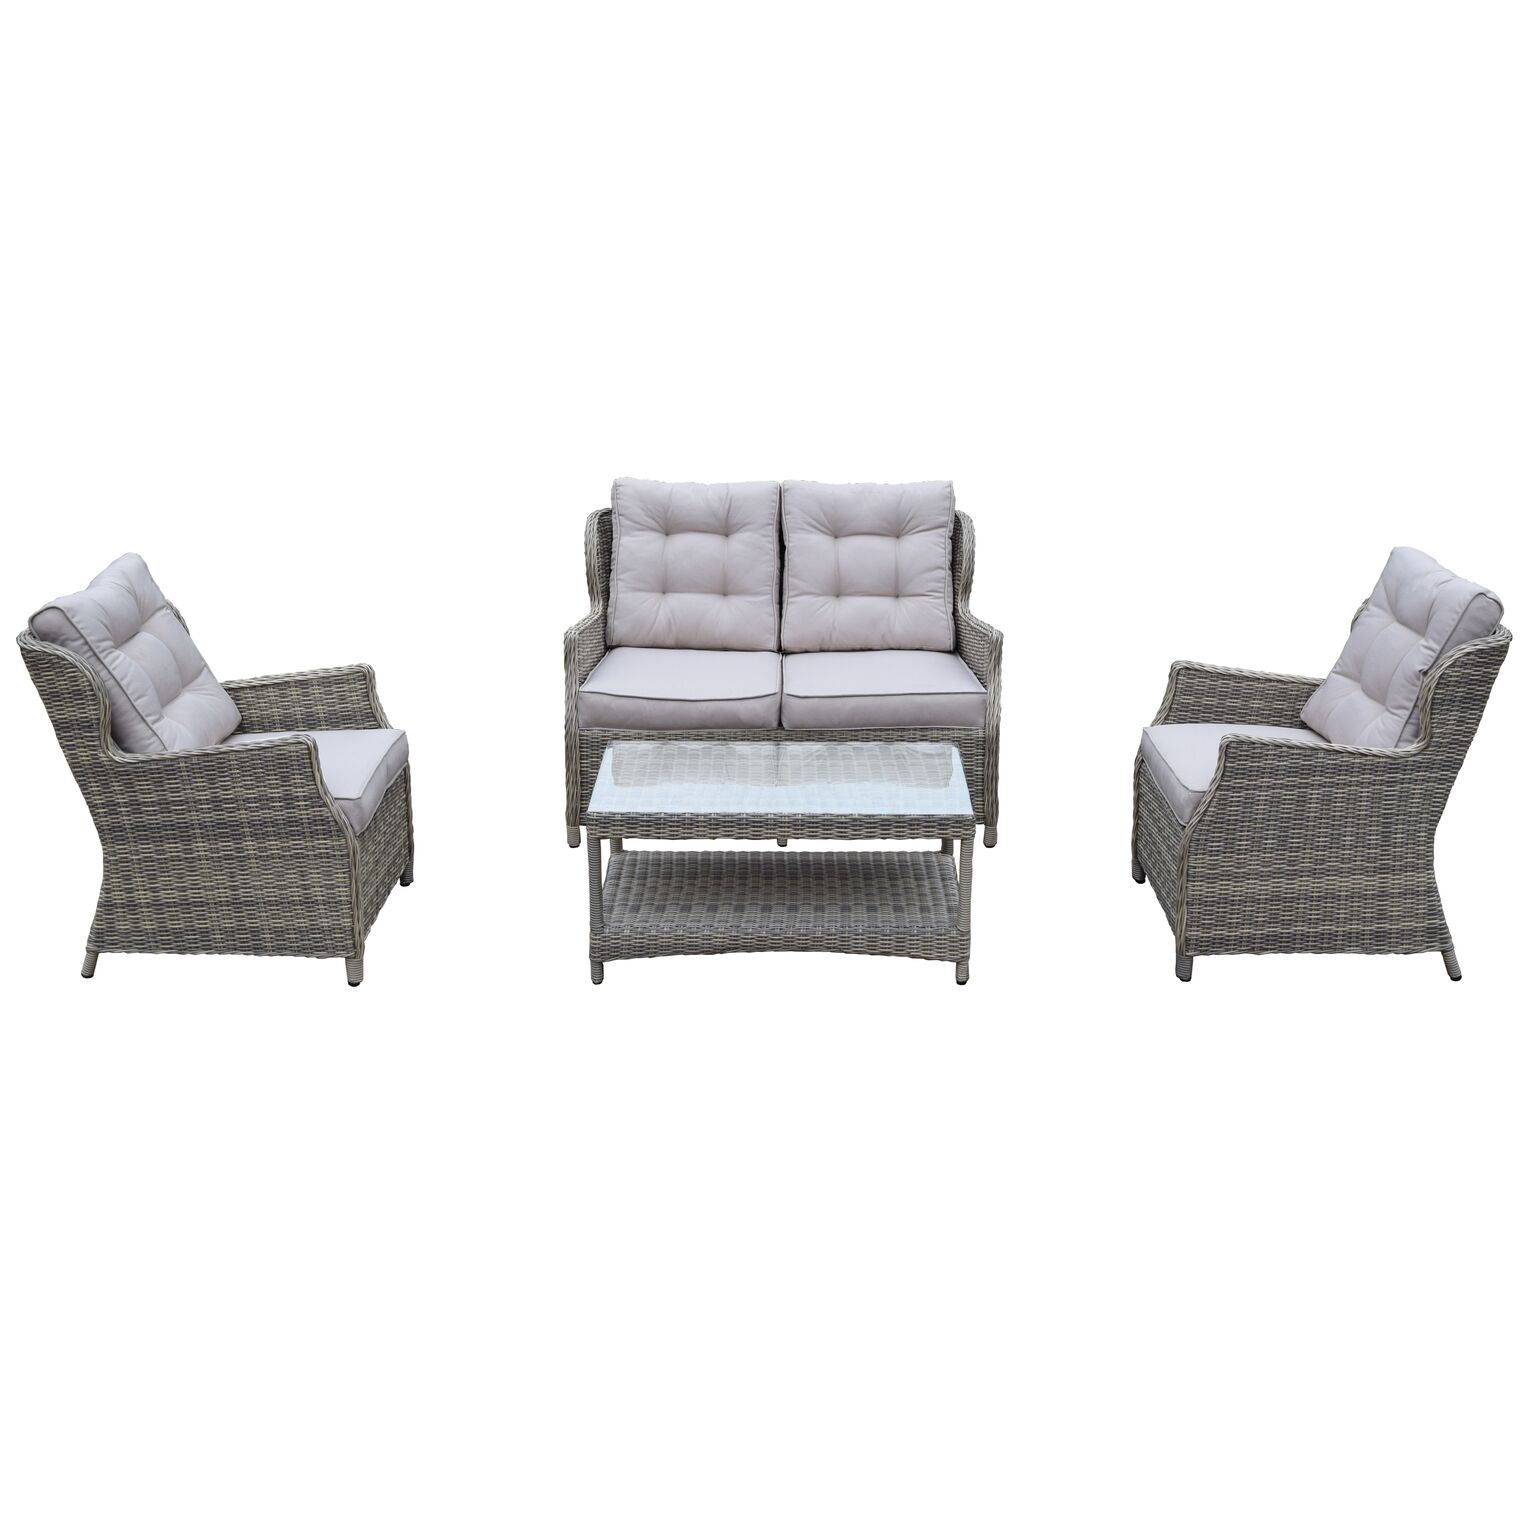 CC Outdoor Living 4-Piece Brown Borneo All-Weather Resin Wicker Chat Set w/ Gray Cushions - image 1 of 2